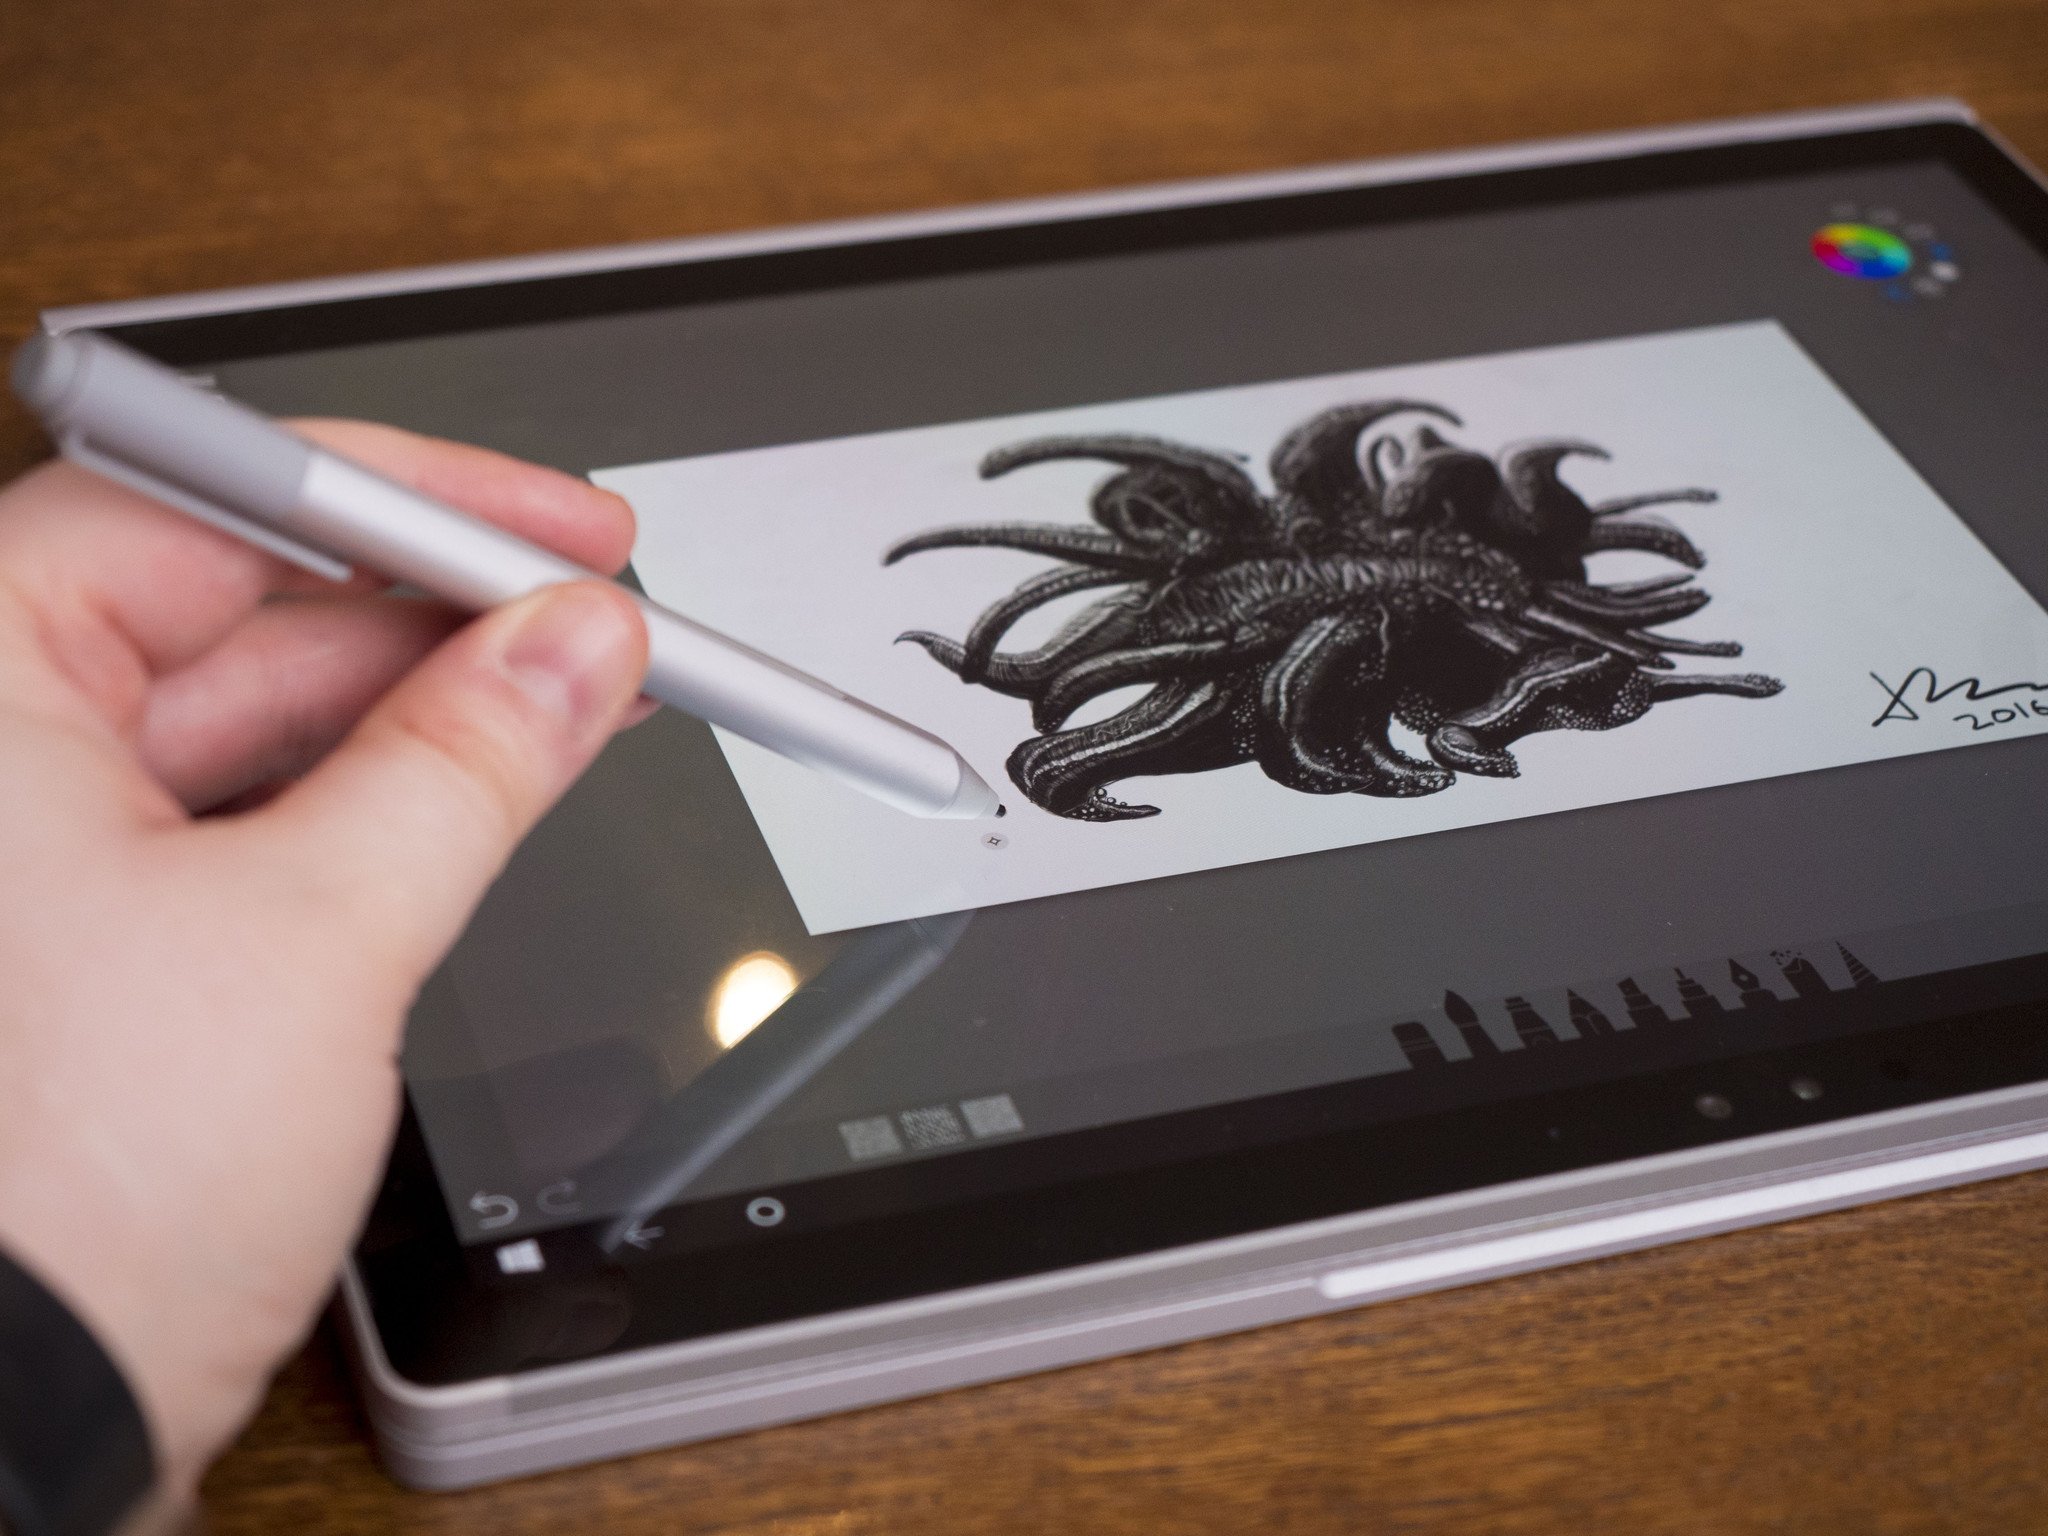 Sketchable review: drawing on the Surface Book becomes a pure joy